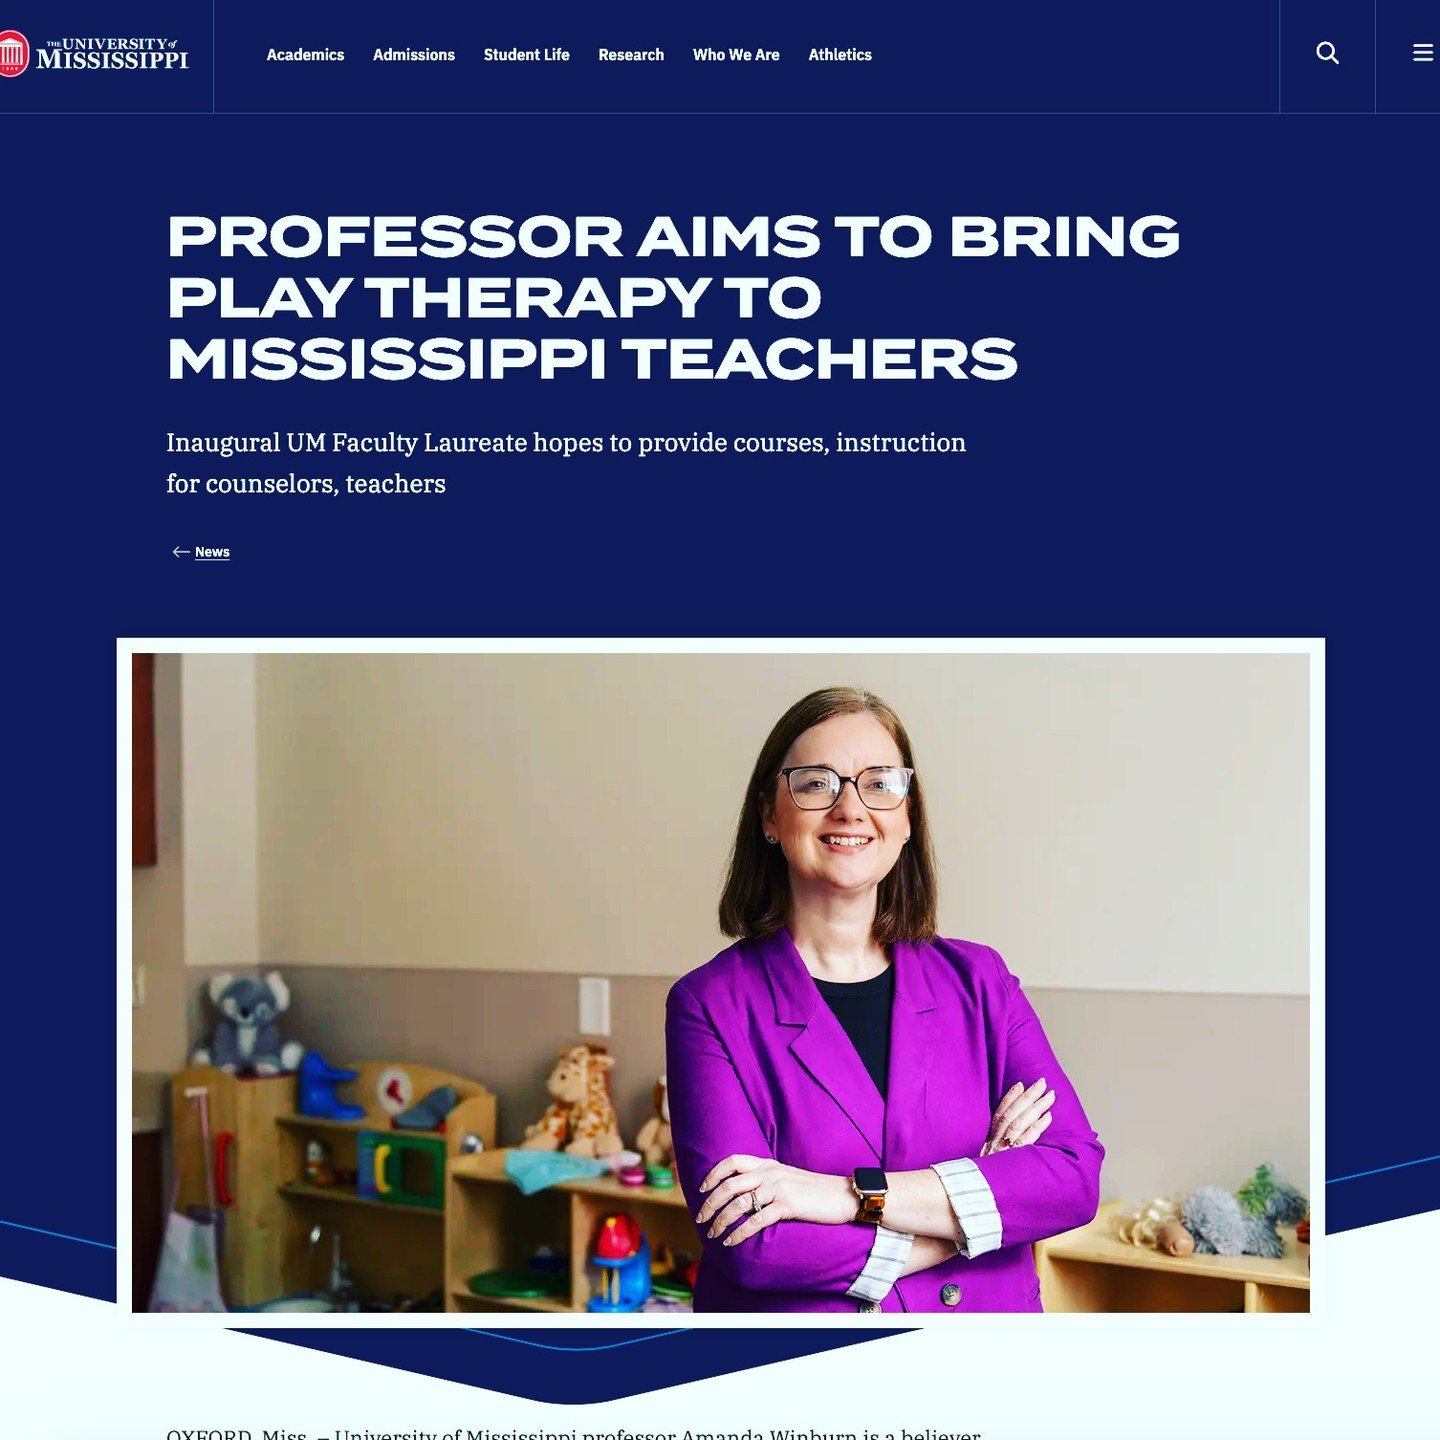 Wondering what the UM Faculty Laureates will do? Amanda Winburn plans to bring play therapy methods to Mississippi classrooms. 

See link in bio to find out more.
#facultylaureatesatum #mississippilab
@olemiss